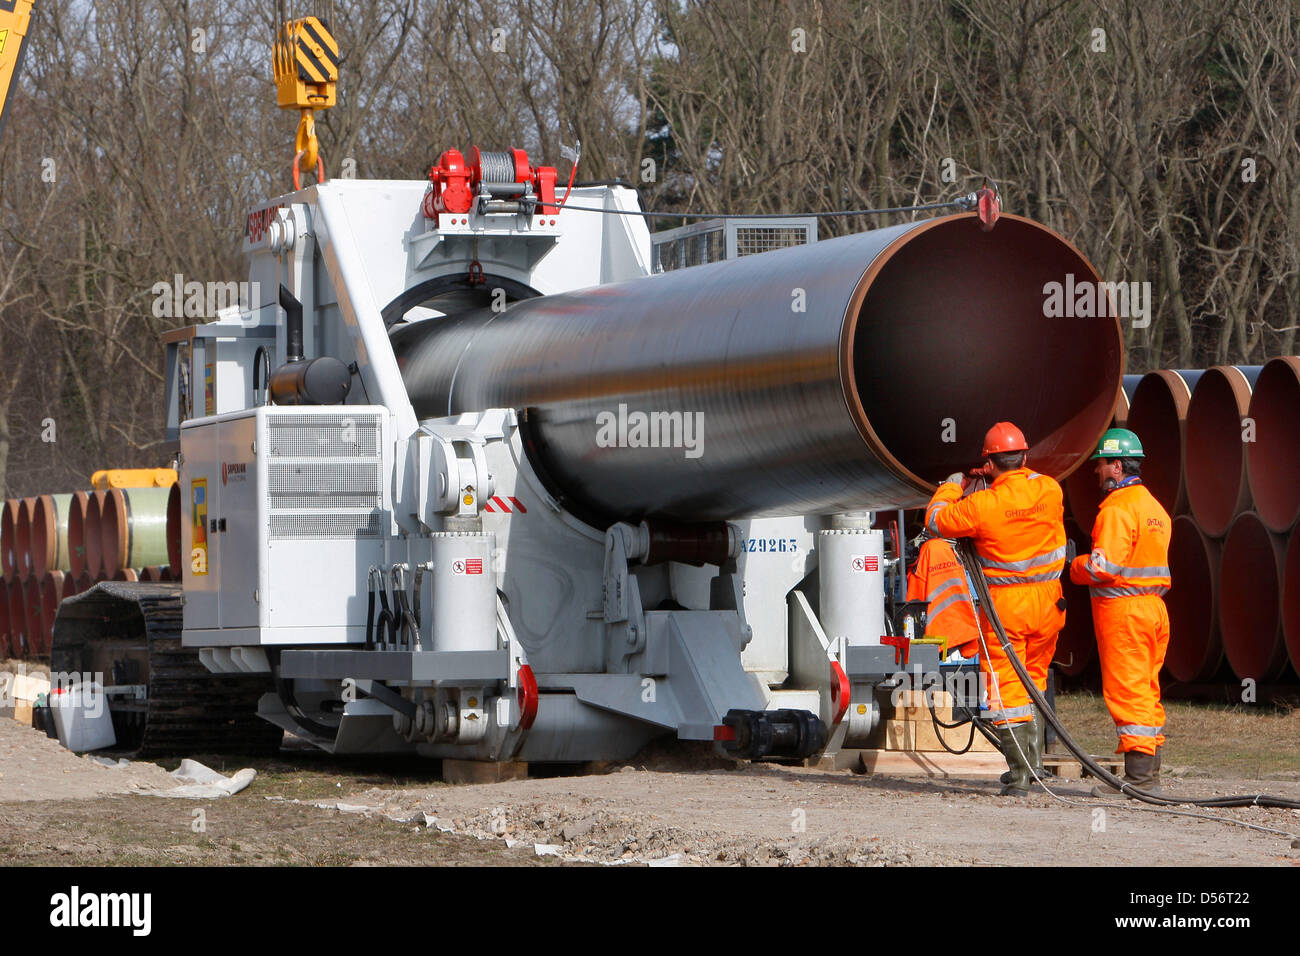 A pipe for the future 'Opal' natural gas pipeline is shaped by staff members of the Italian company Ghizzoni near Eberswalde, Germany, 24 March 2010. The construction of the 'Opal' pipeline (Ostsee-Pipeline-Anbindungs-Leitung, Baltic Sea-Pipeline-Connection-Line) started near Prenzlau and will be finished in fall 2011 by more than 1000 construction workers. The construction is Germ Stock Photo